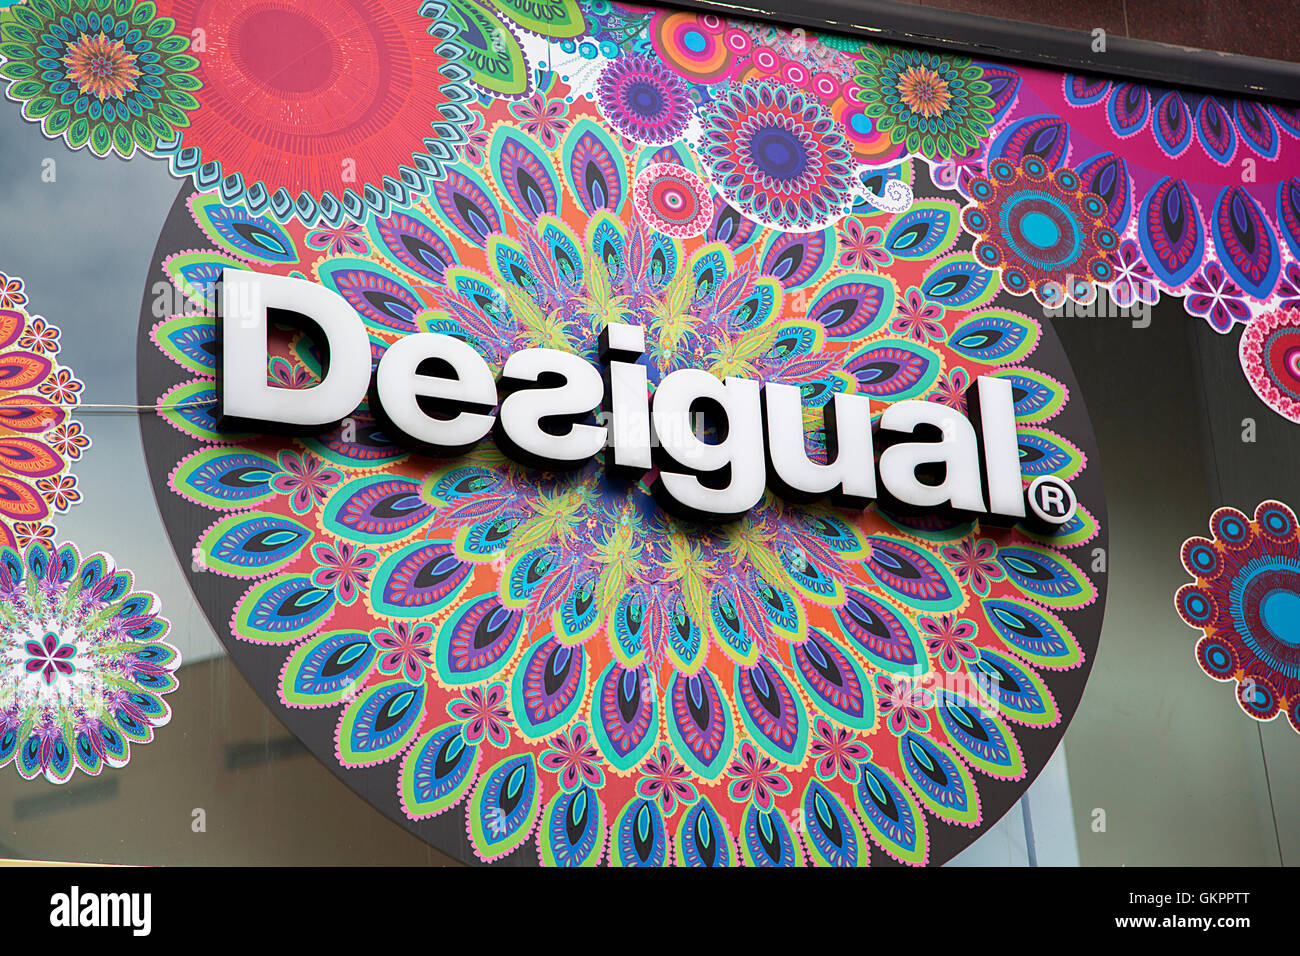 LAS PALMAS, SPAIN - MAY 4, 2016: Detail of the Desigual shop in Las Palmas,  Spain. Desigual is a casual clothing brand founded a Stock Photo - Alamy